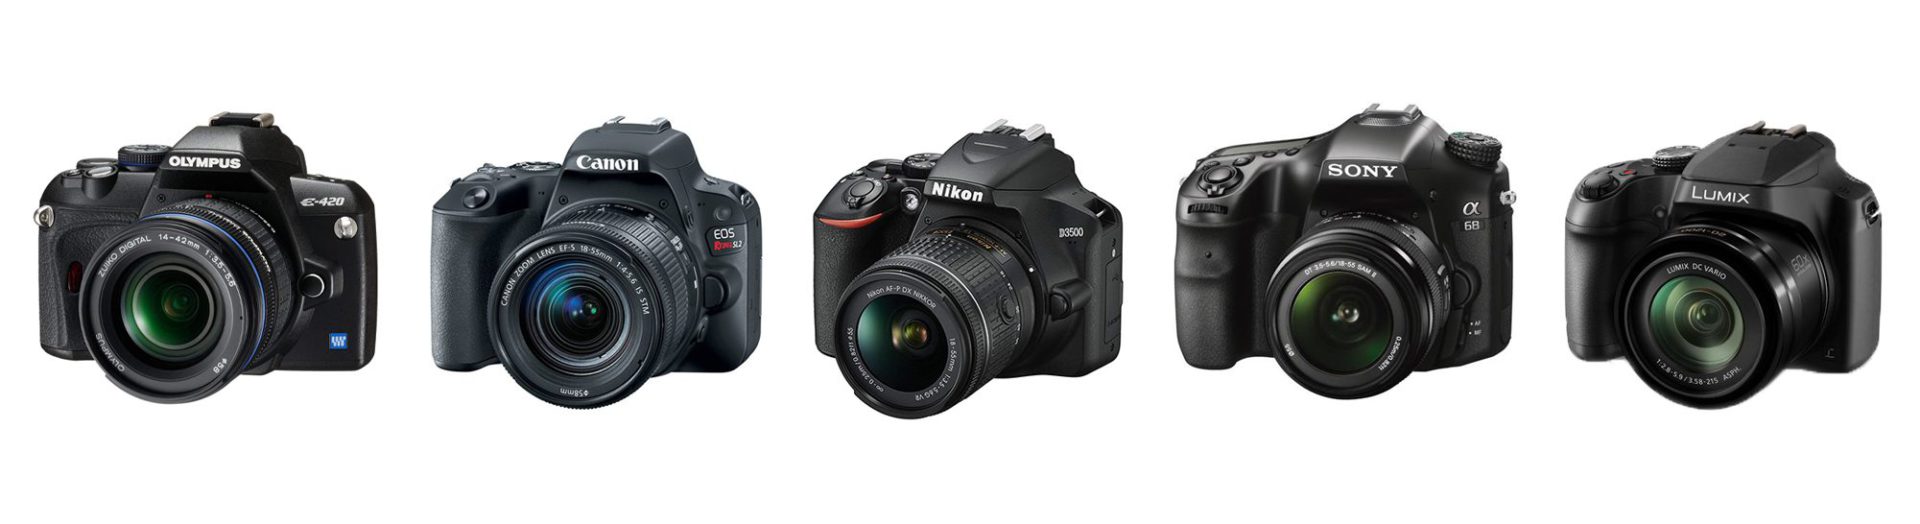 DSLR cameras from the five main brands - Olympus, Canon, Nikon, Sony, and Panasonic.